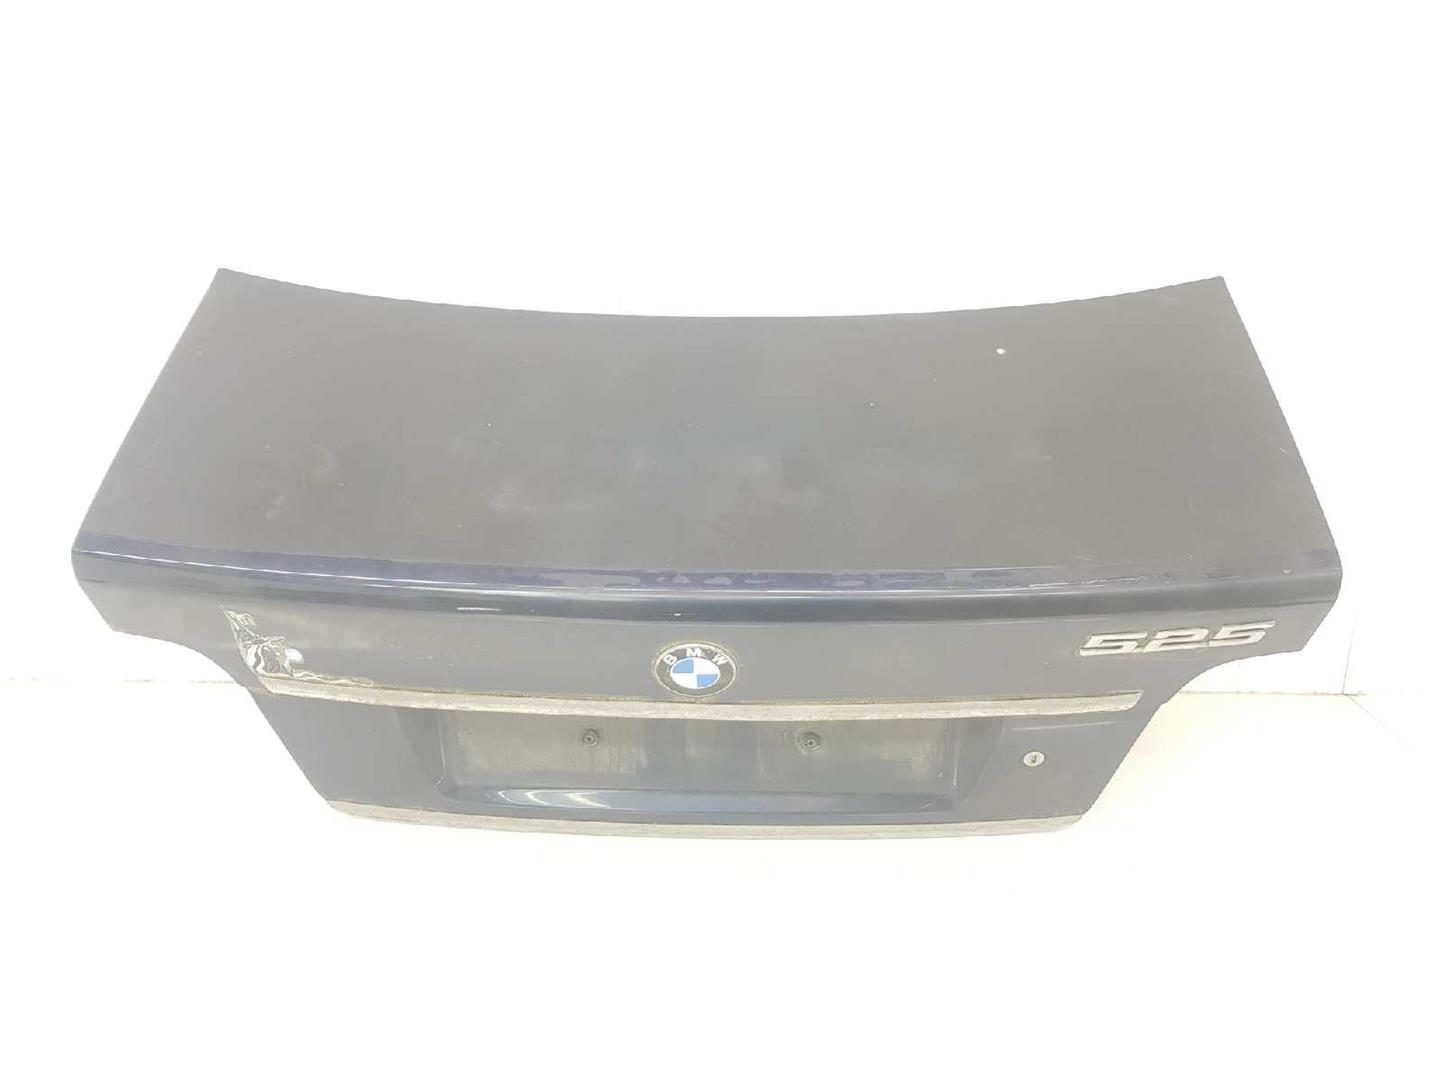 BMW 5 Series E39 (1995-2004) Bootlid Rear Boot 41628167801, 41628167801, NEGRO317 19755413